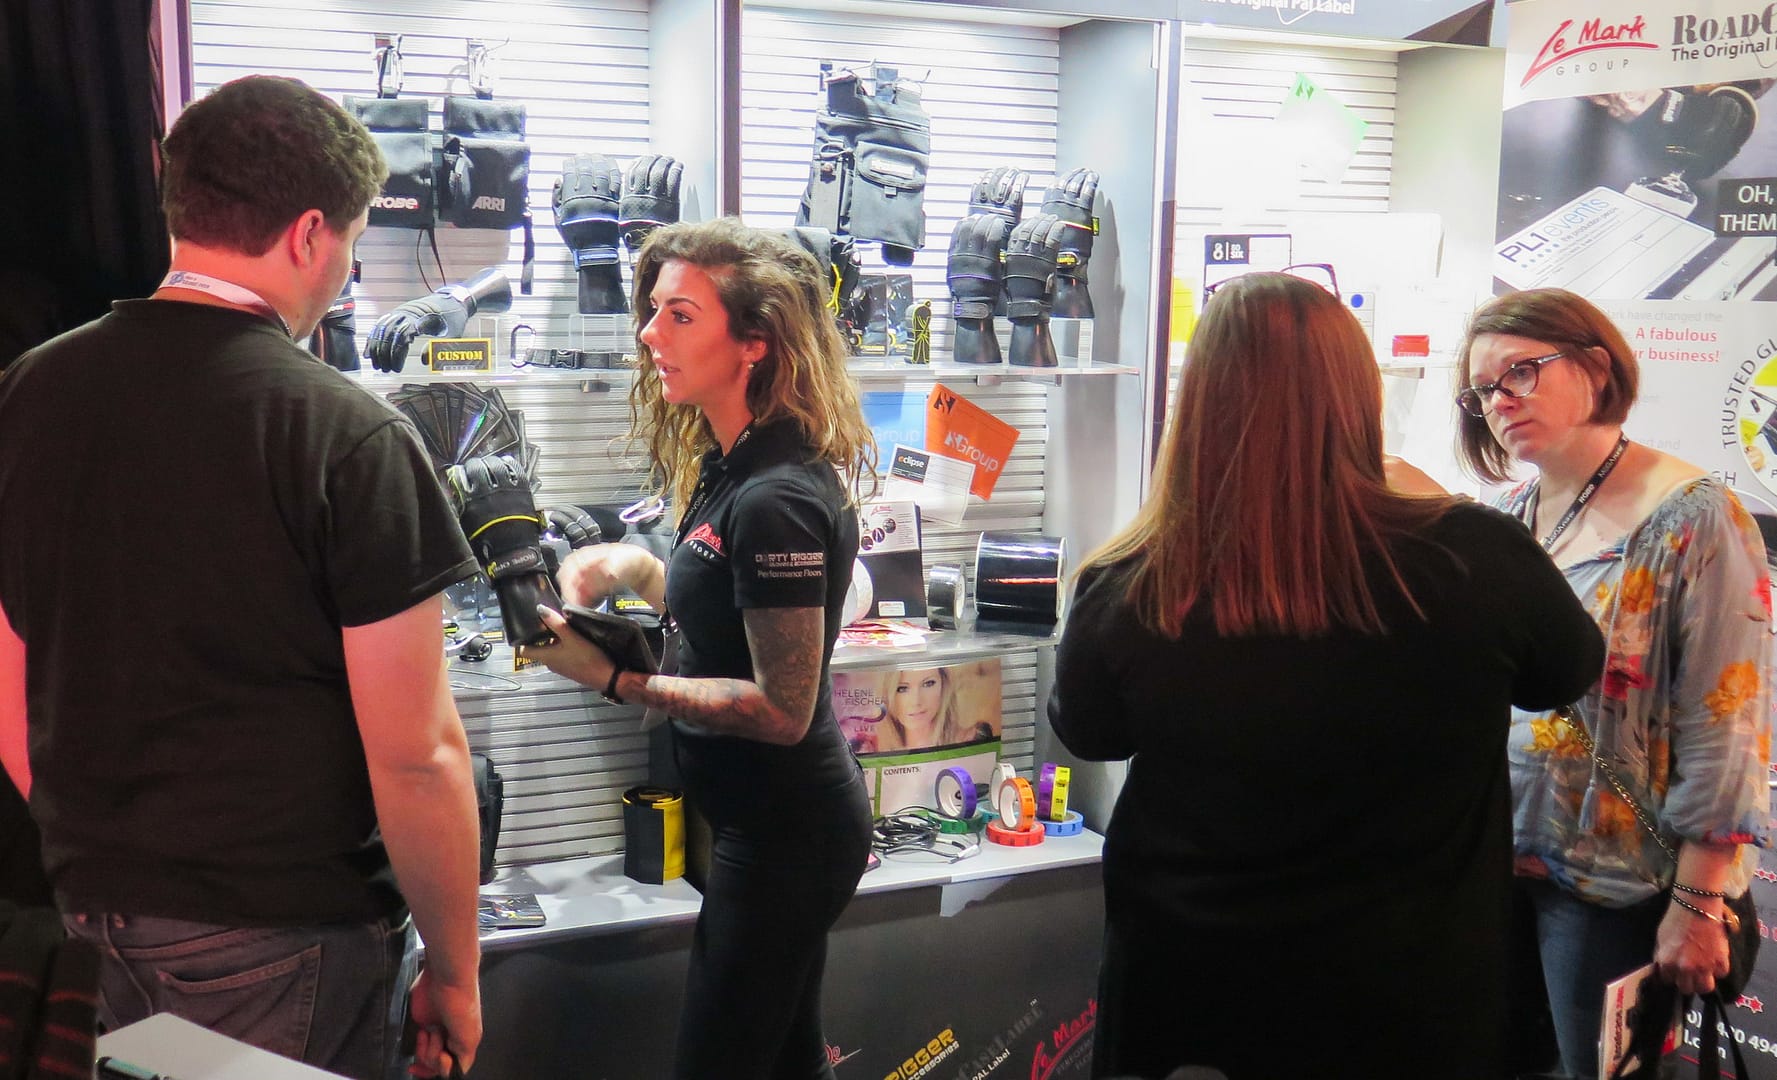 Jess was on hand to demo the Dirty Rigger Gloves & Accessories